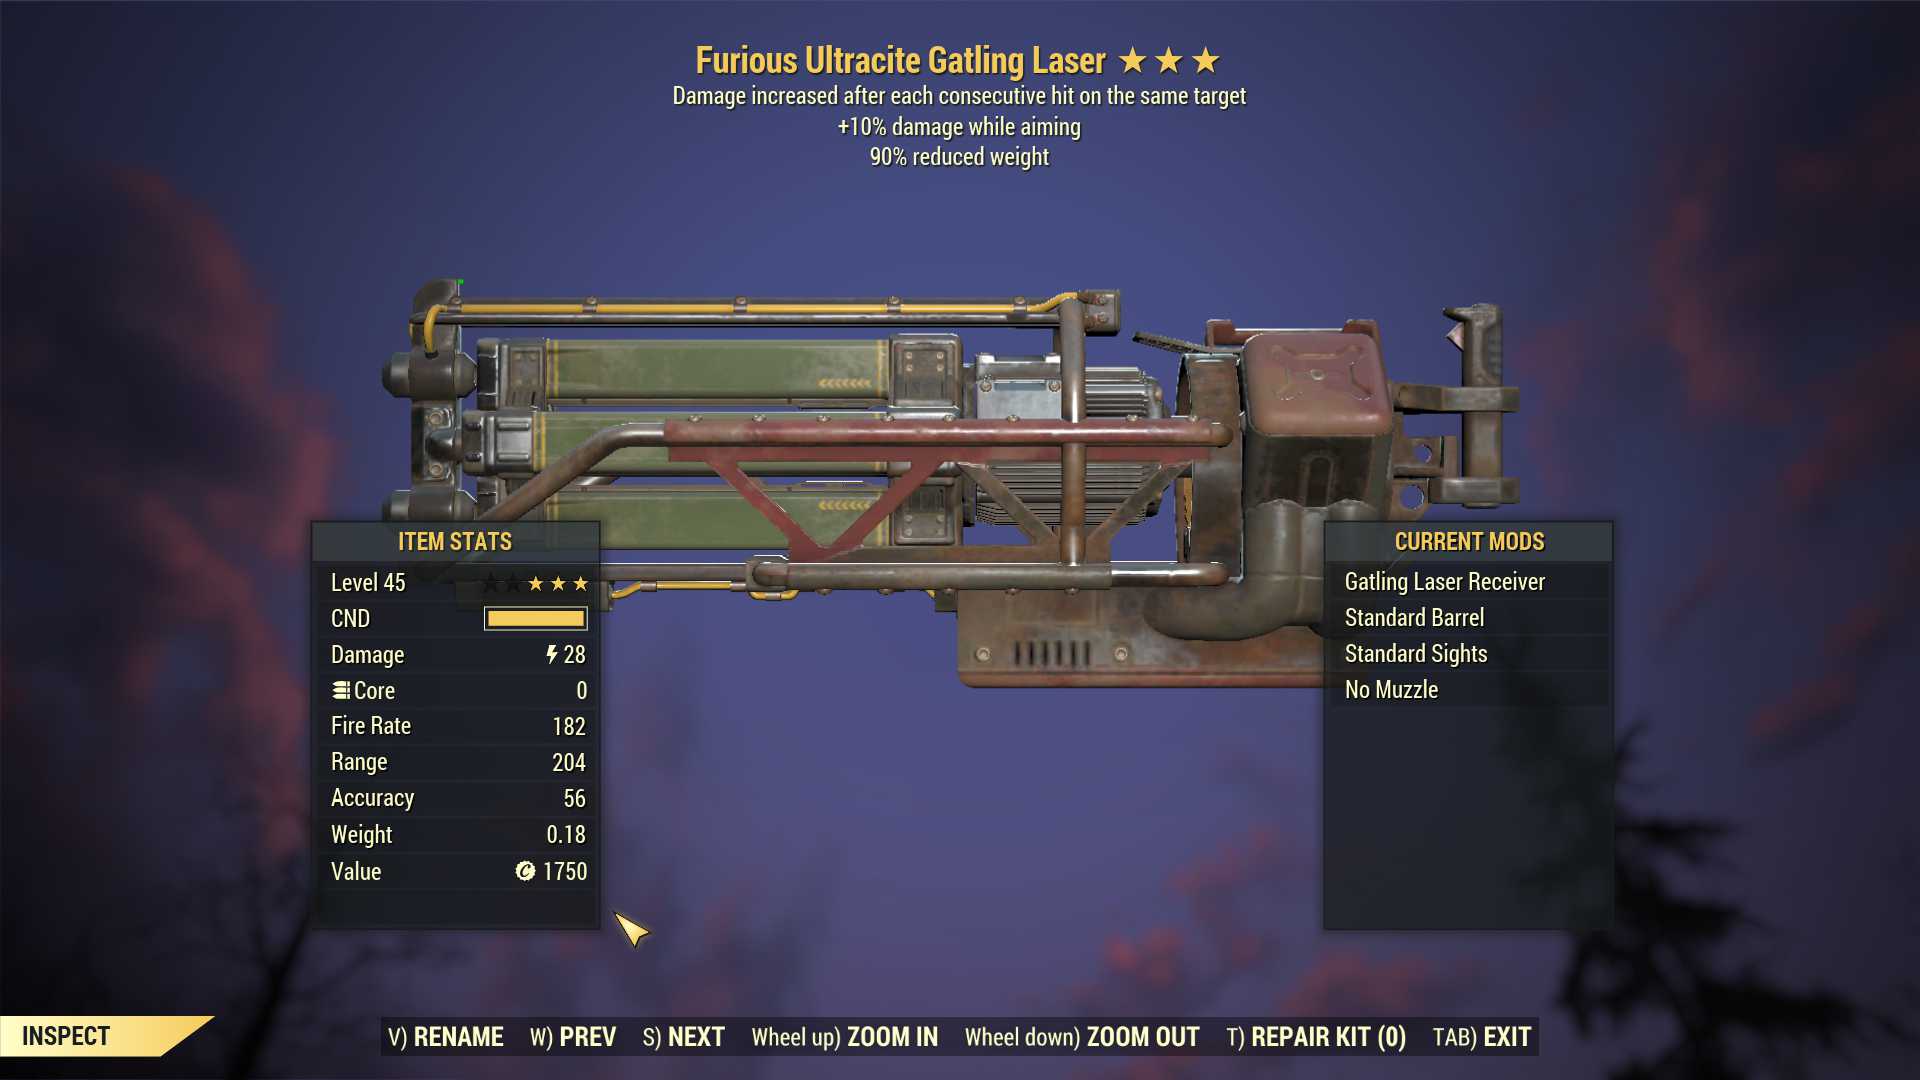 Furious Ultracite Gatling Laser (+25% damage WA, 90% reduced weight)